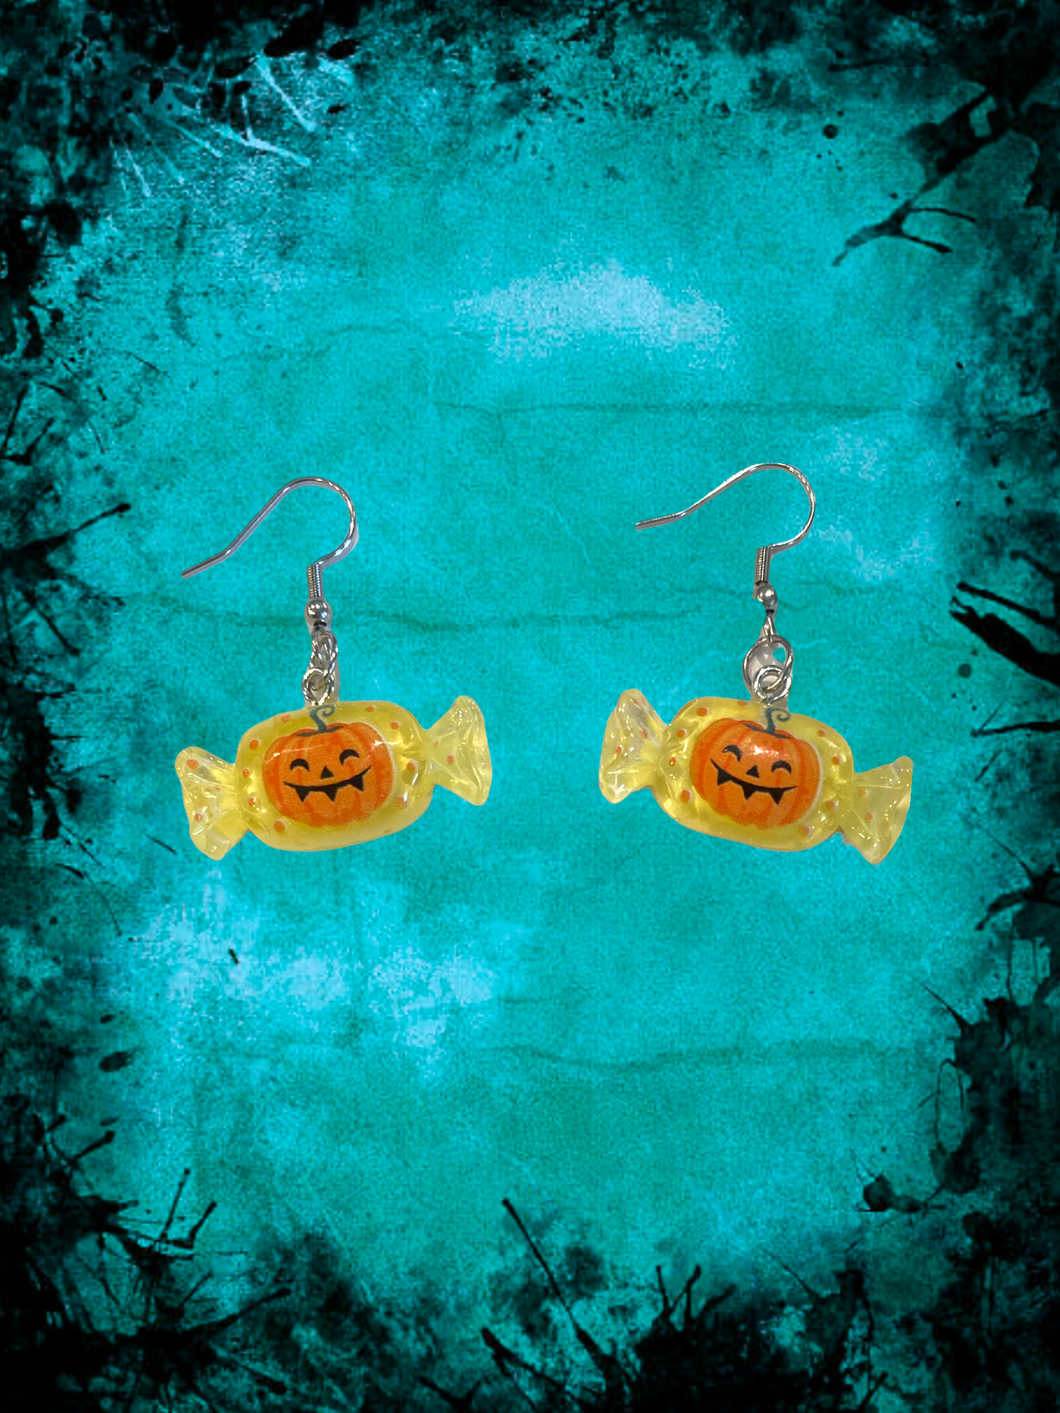 Vintage Candy in Yellow Earrings